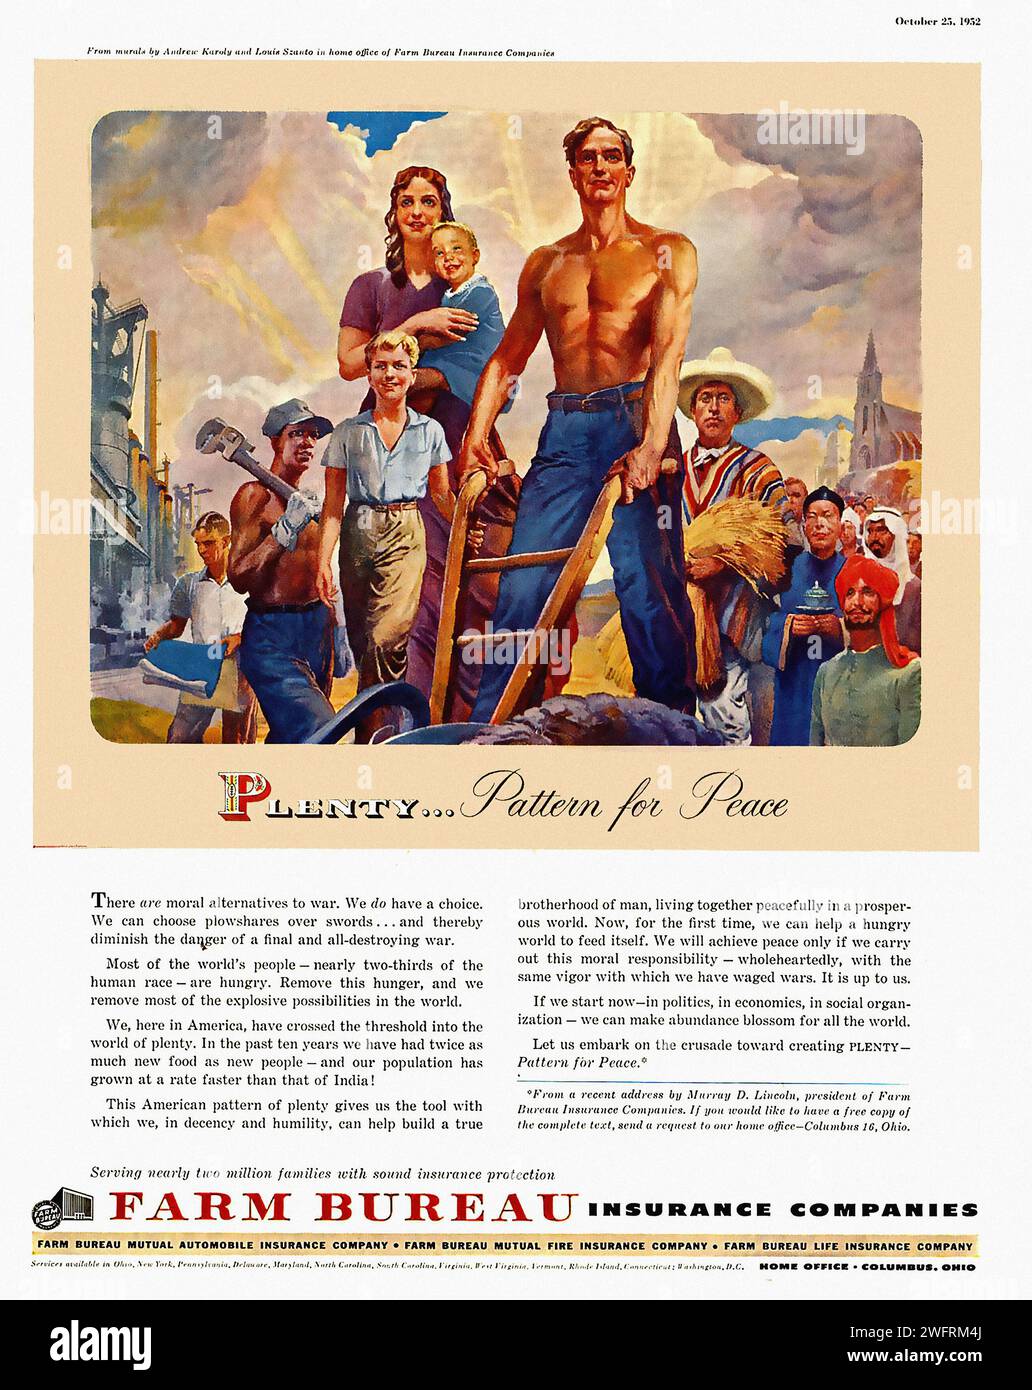 “PLENTY… PATTERN FOR PEACE”  A vintage advertisement poster for the Farm Bureau Insurance Company during the World War II era. The poster, in landscape orientation, features an illustration of a group of people carrying tools and farming equipment, walking on a dirt road towards a city skyline. The city skyline in the background showcases tall buildings and a church spire. The text on the poster reads “Plenty… Pattern for Peace” and “Farm Bureau Insurance Company”. Additional smaller text provides information about the company and its services. The colors used in the poster are mainly red, blu Stock Photo